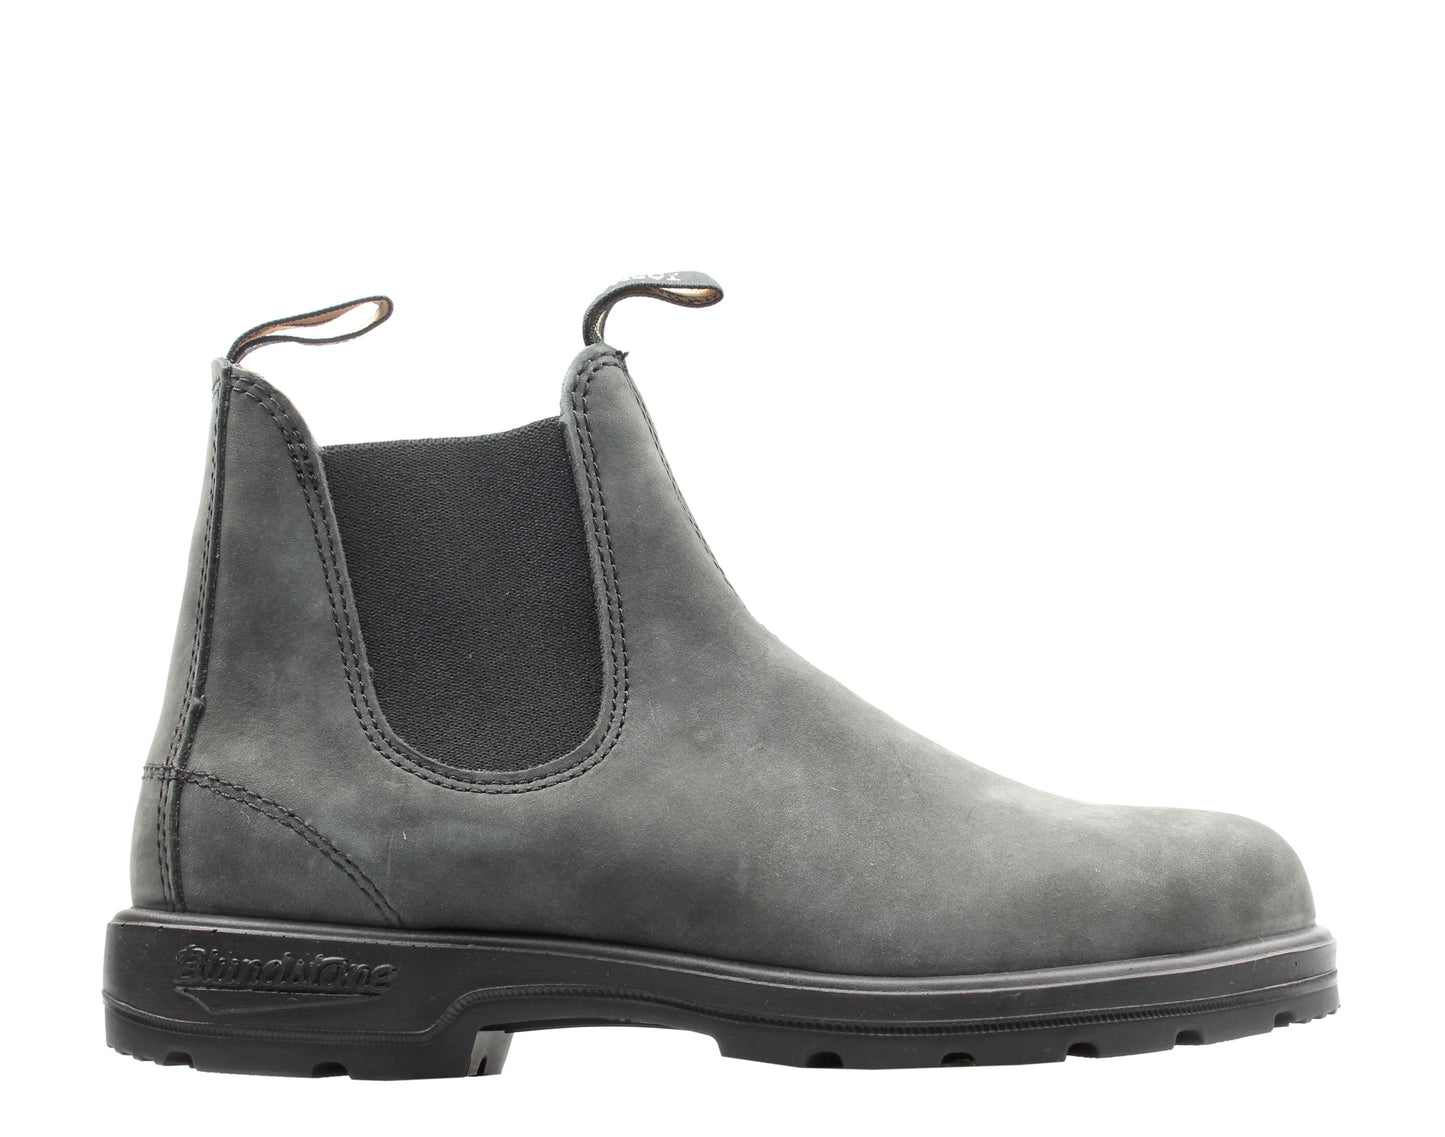 Blundstone 587 Classic Chelsea Boots Rustic Black Pull-On Adult BL587